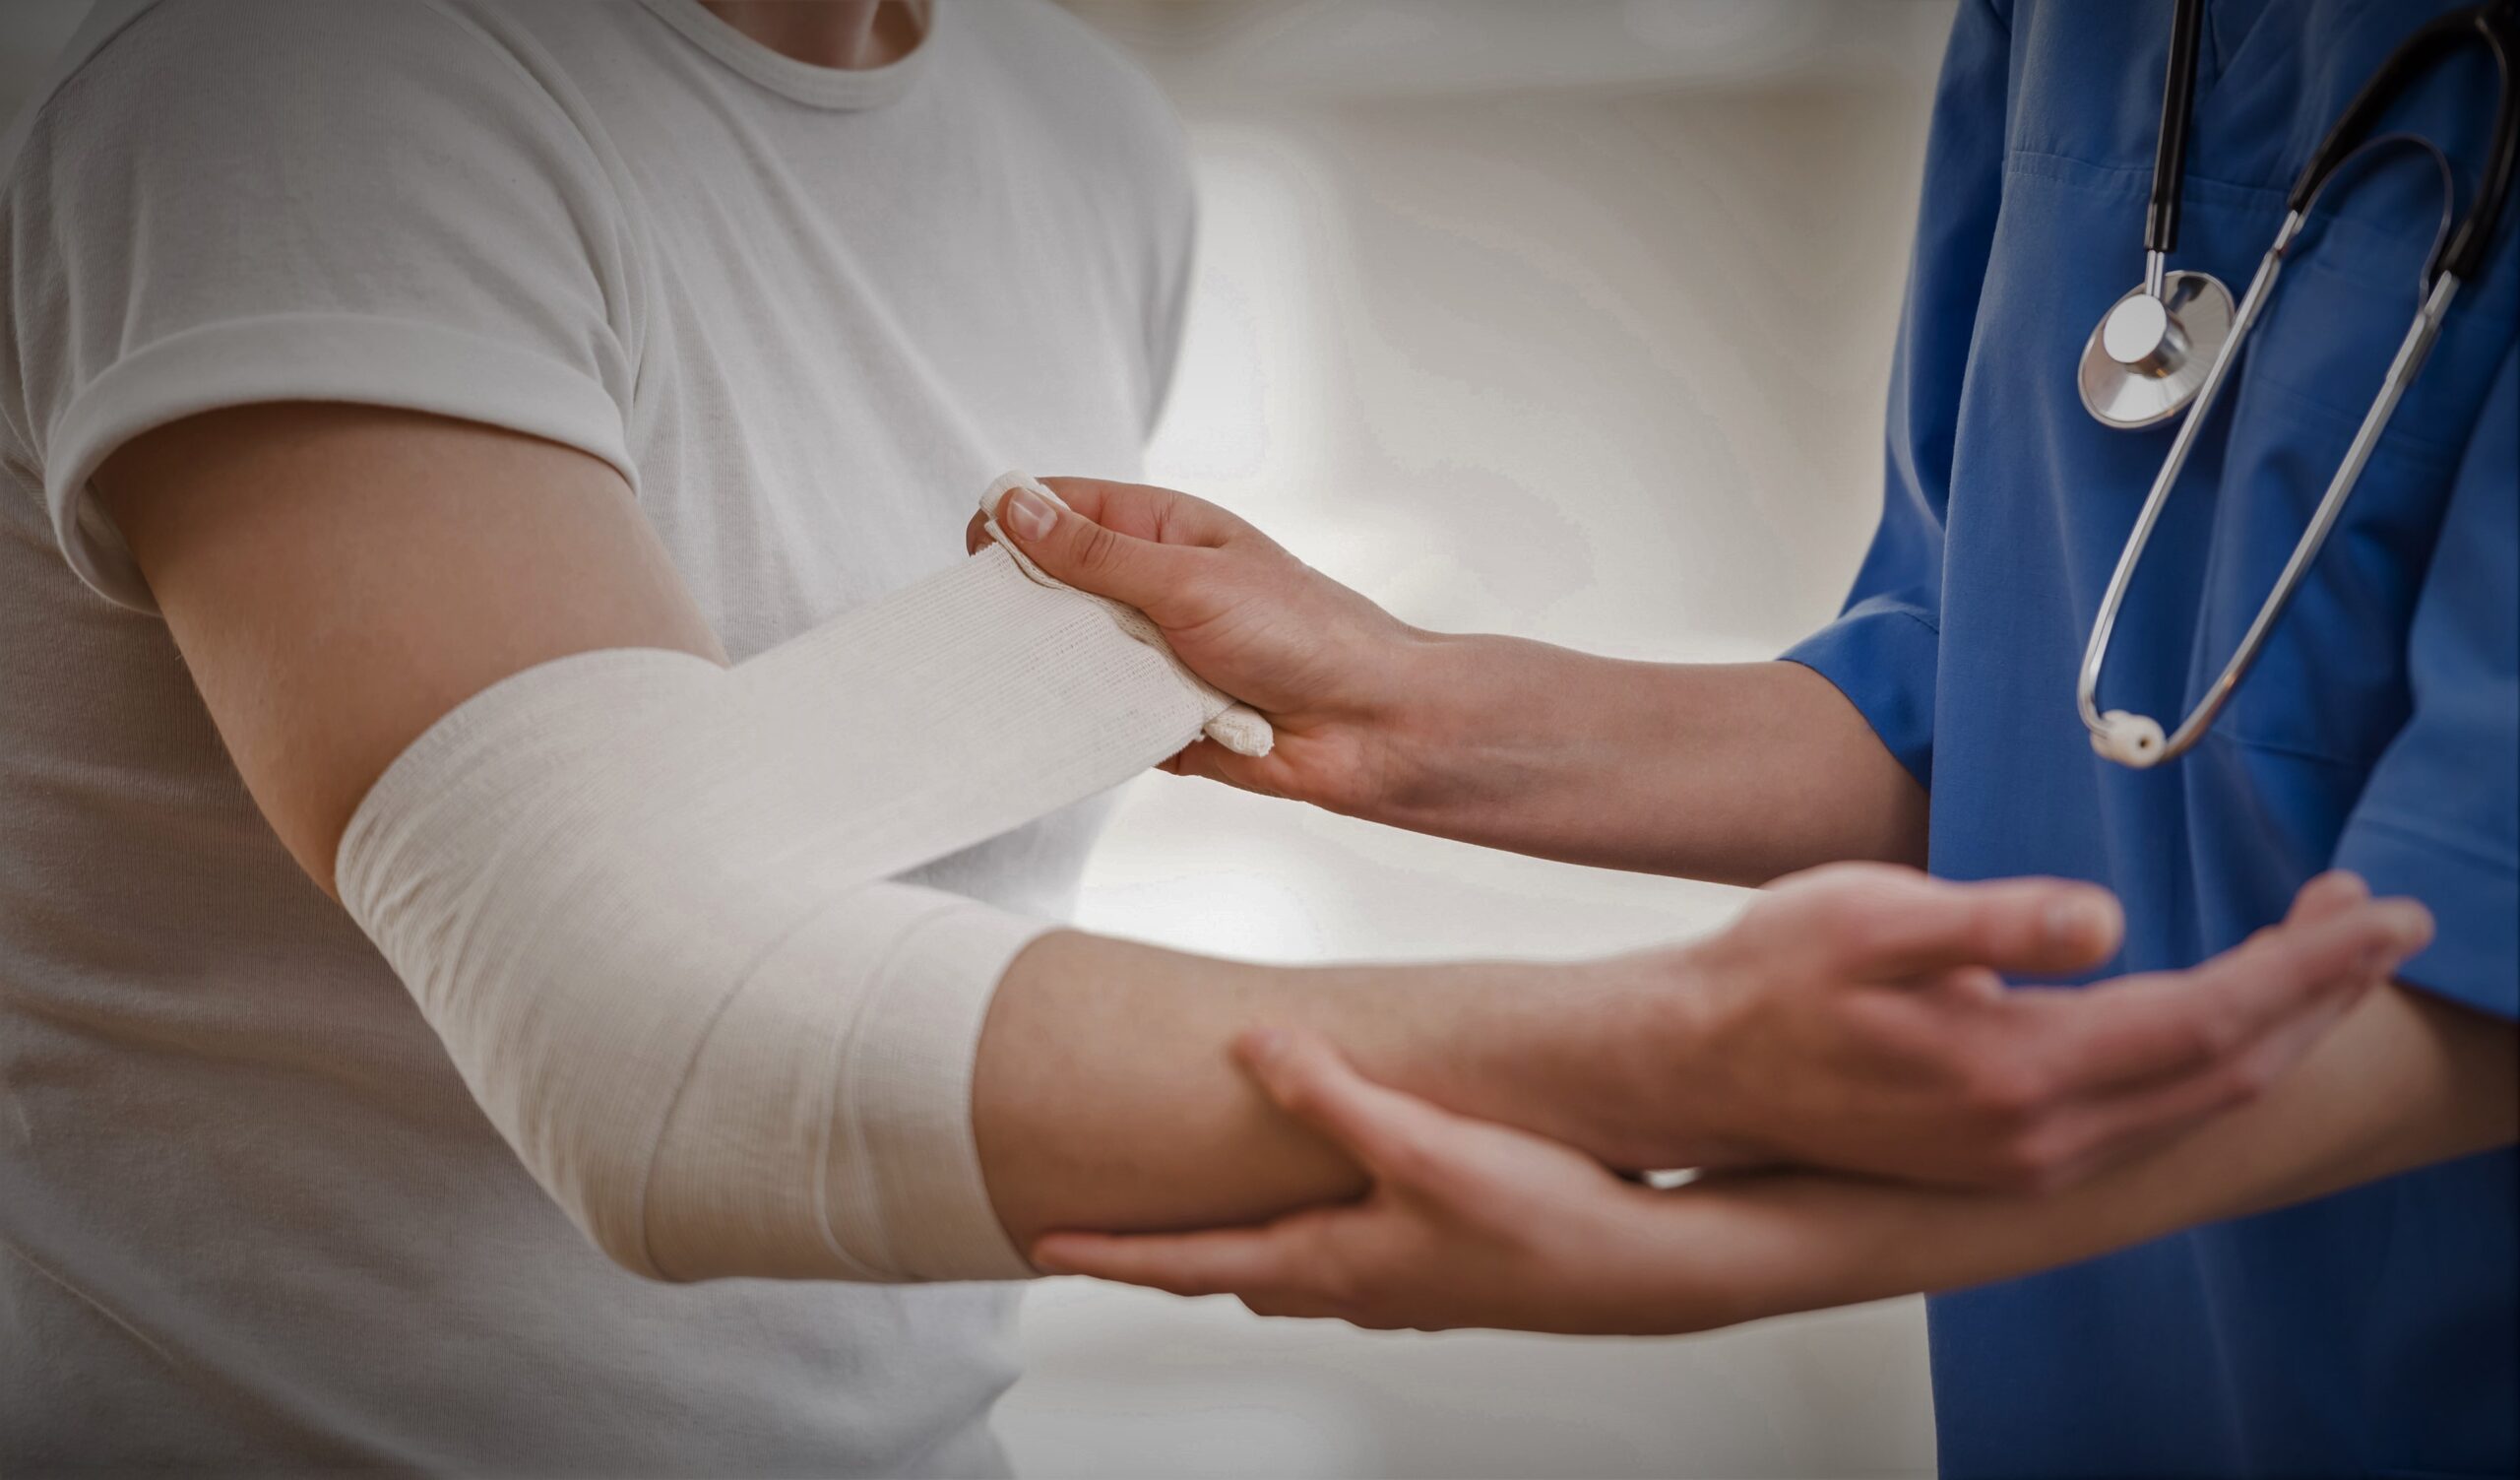 Global Advanced Wound Care Market Size, Share, Industry Growth, Analysis & Trends from 2022 to 2027